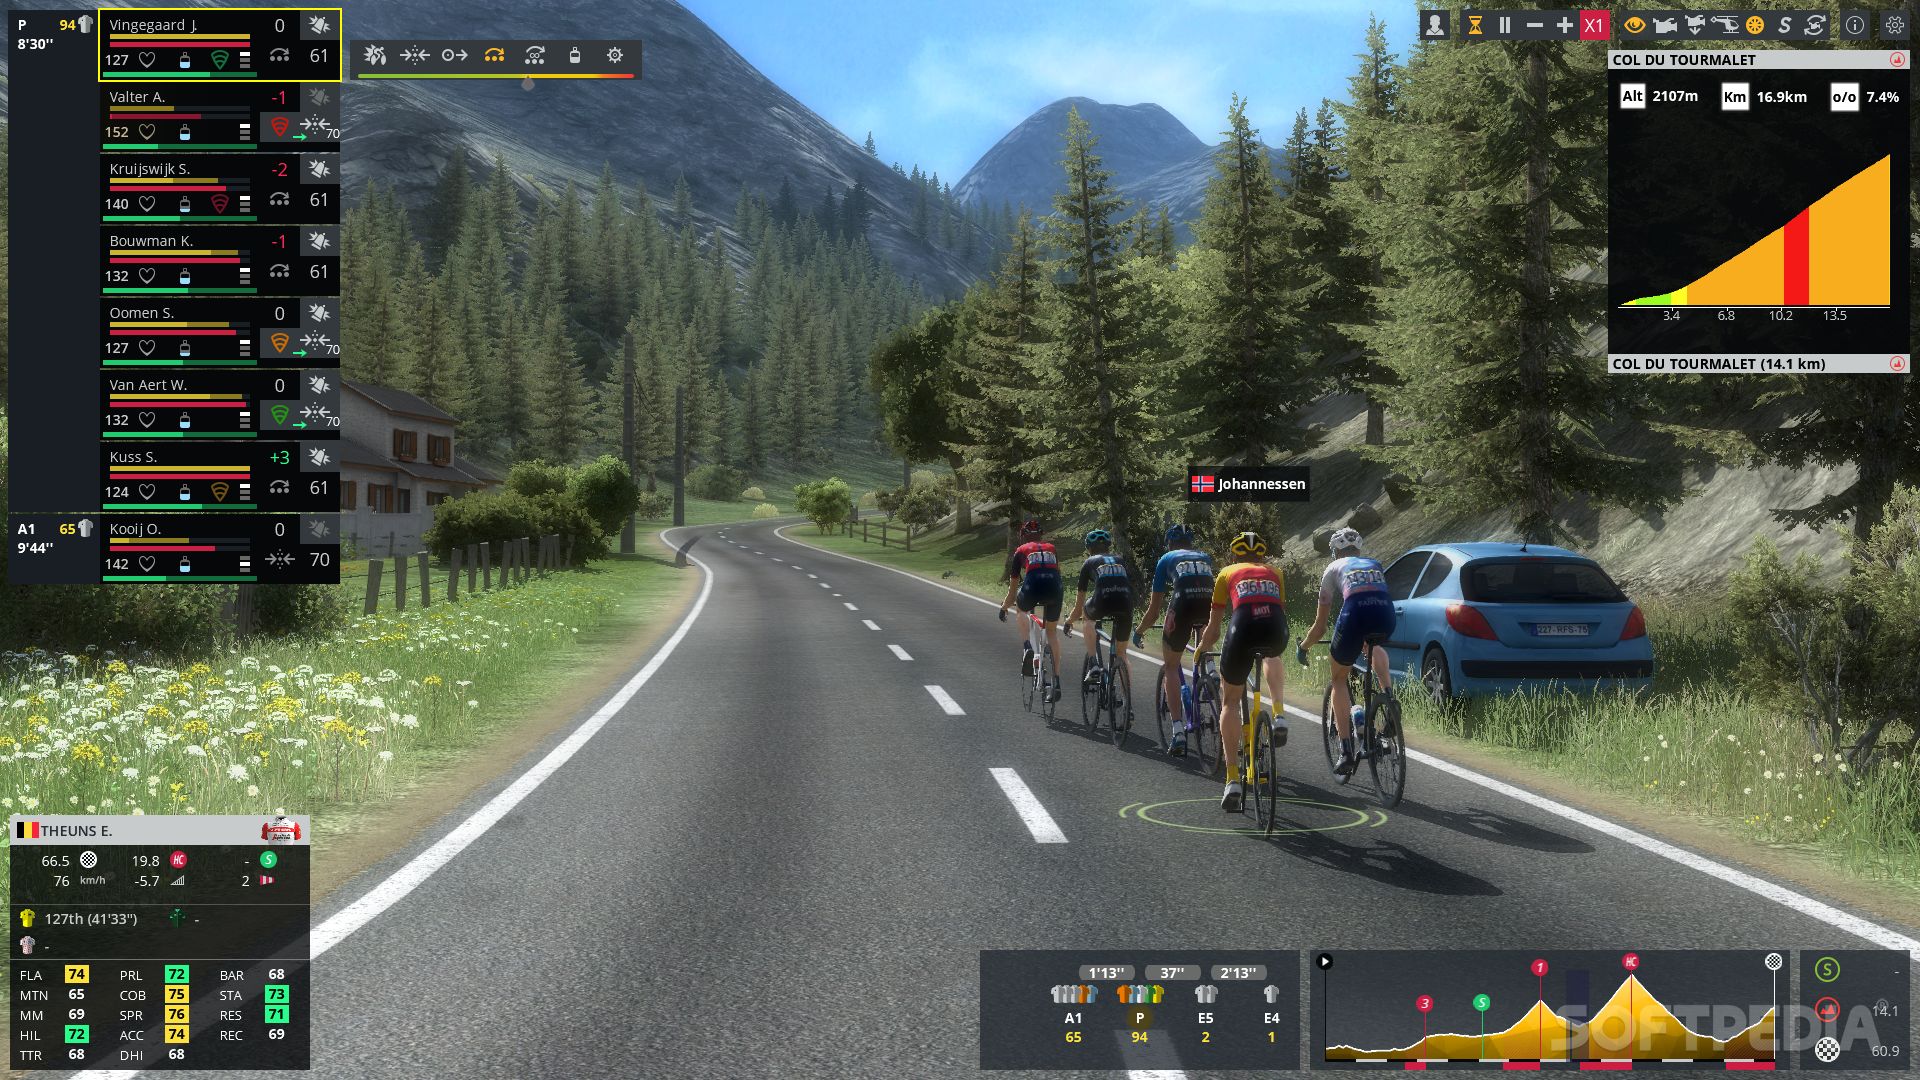 Pro Cycling Manager 2023 Review - Rapid Reviews UK